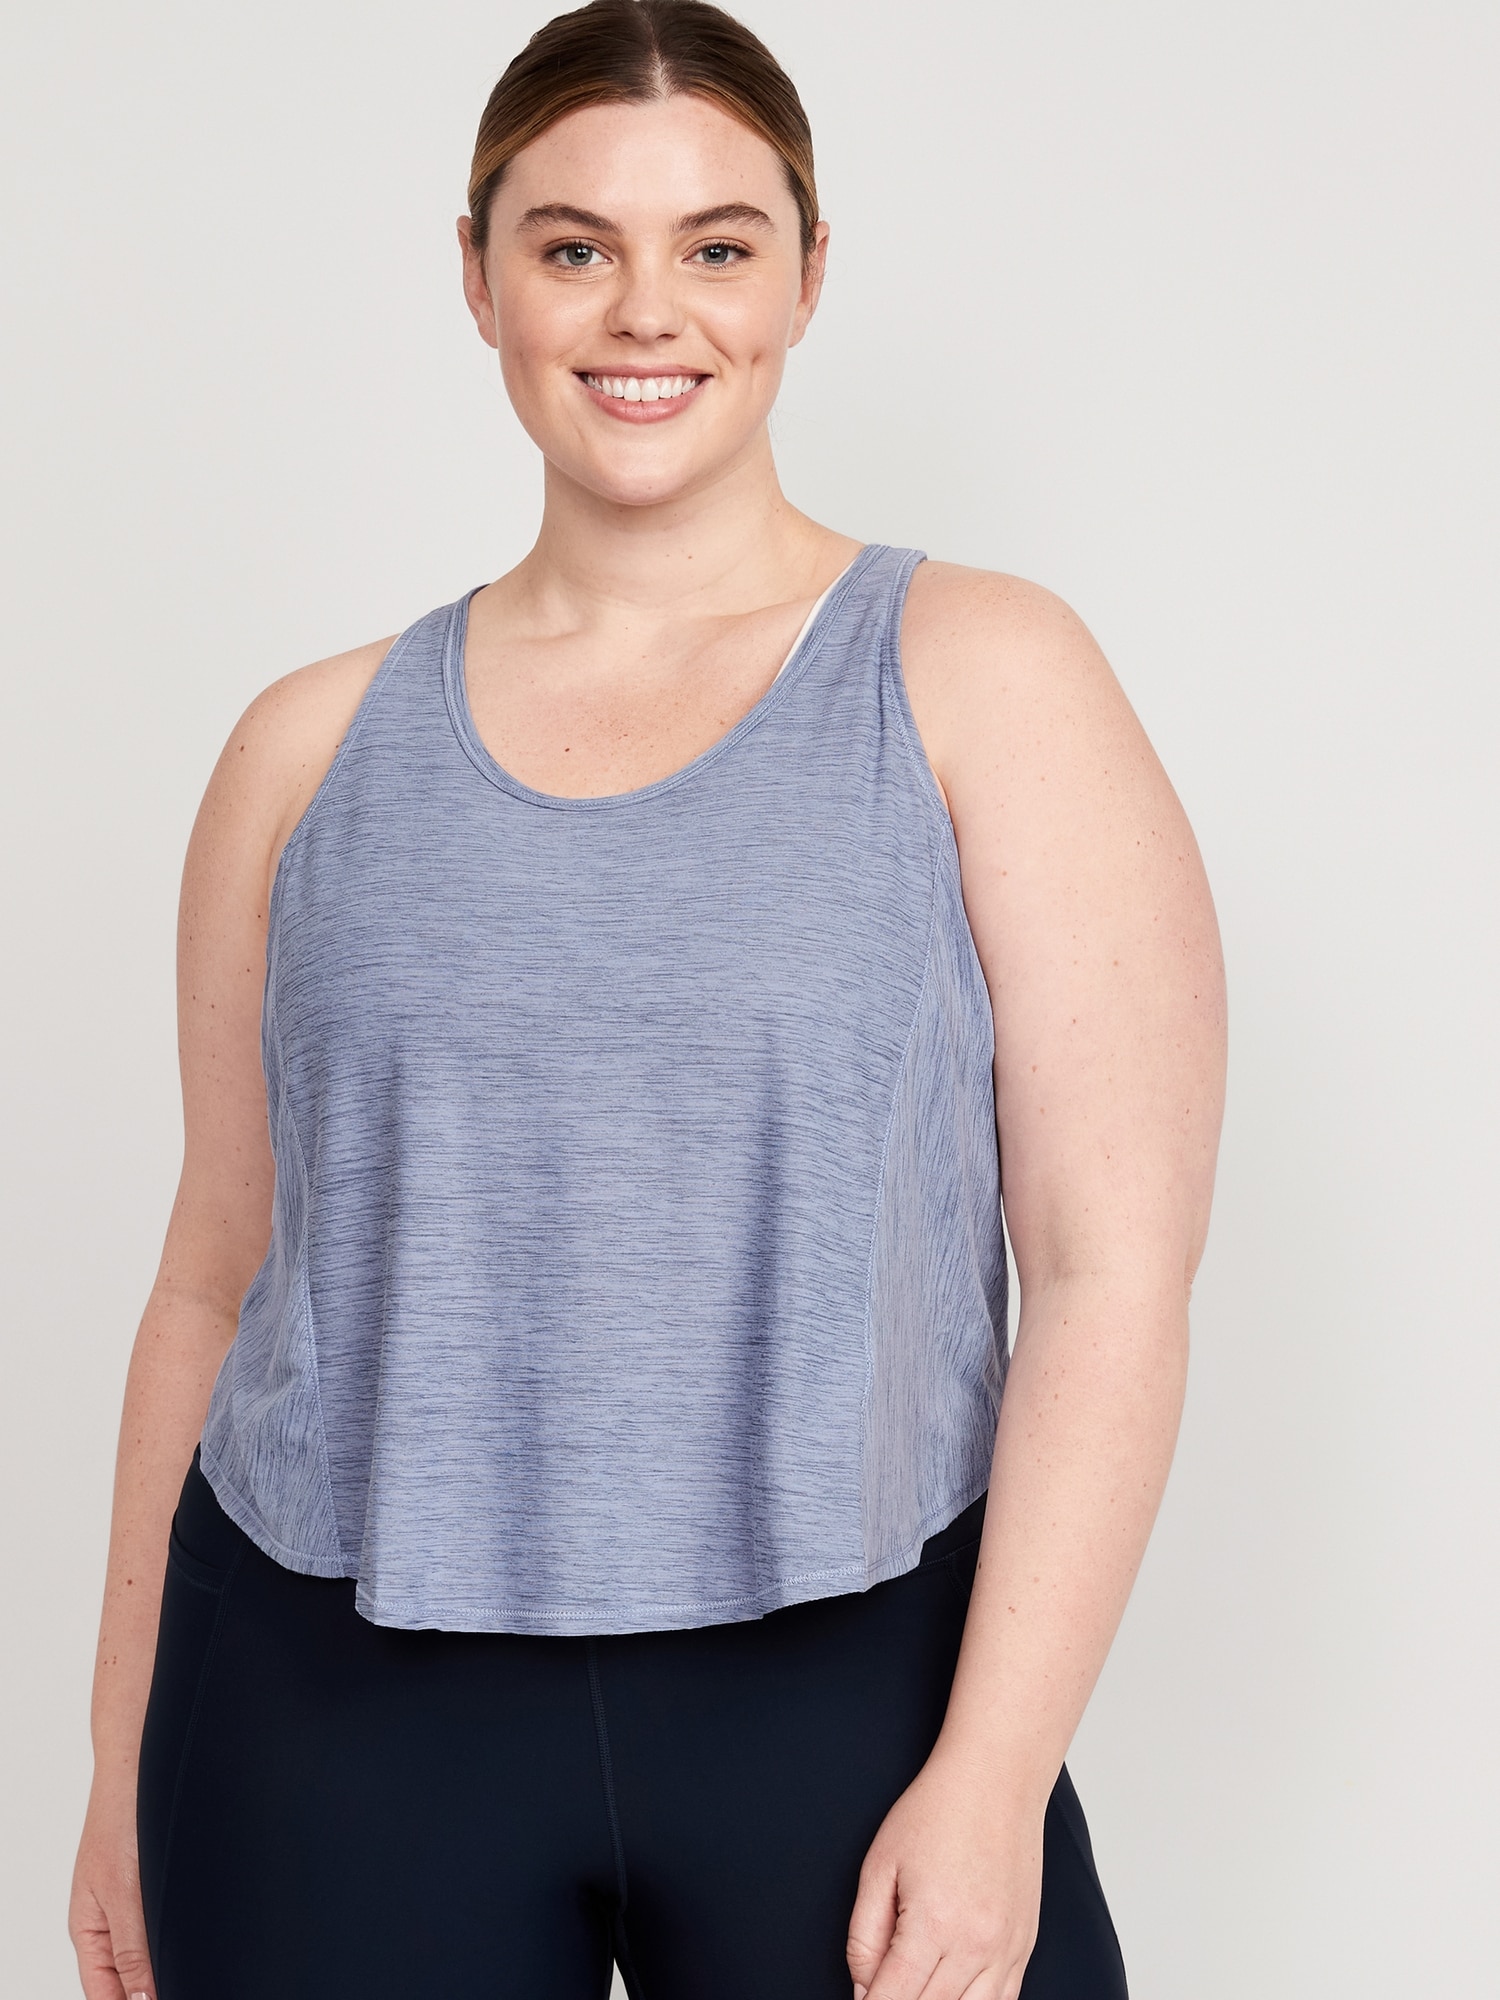 Breathe ON Cropped Racerback Tank Top for Women | Old Navy